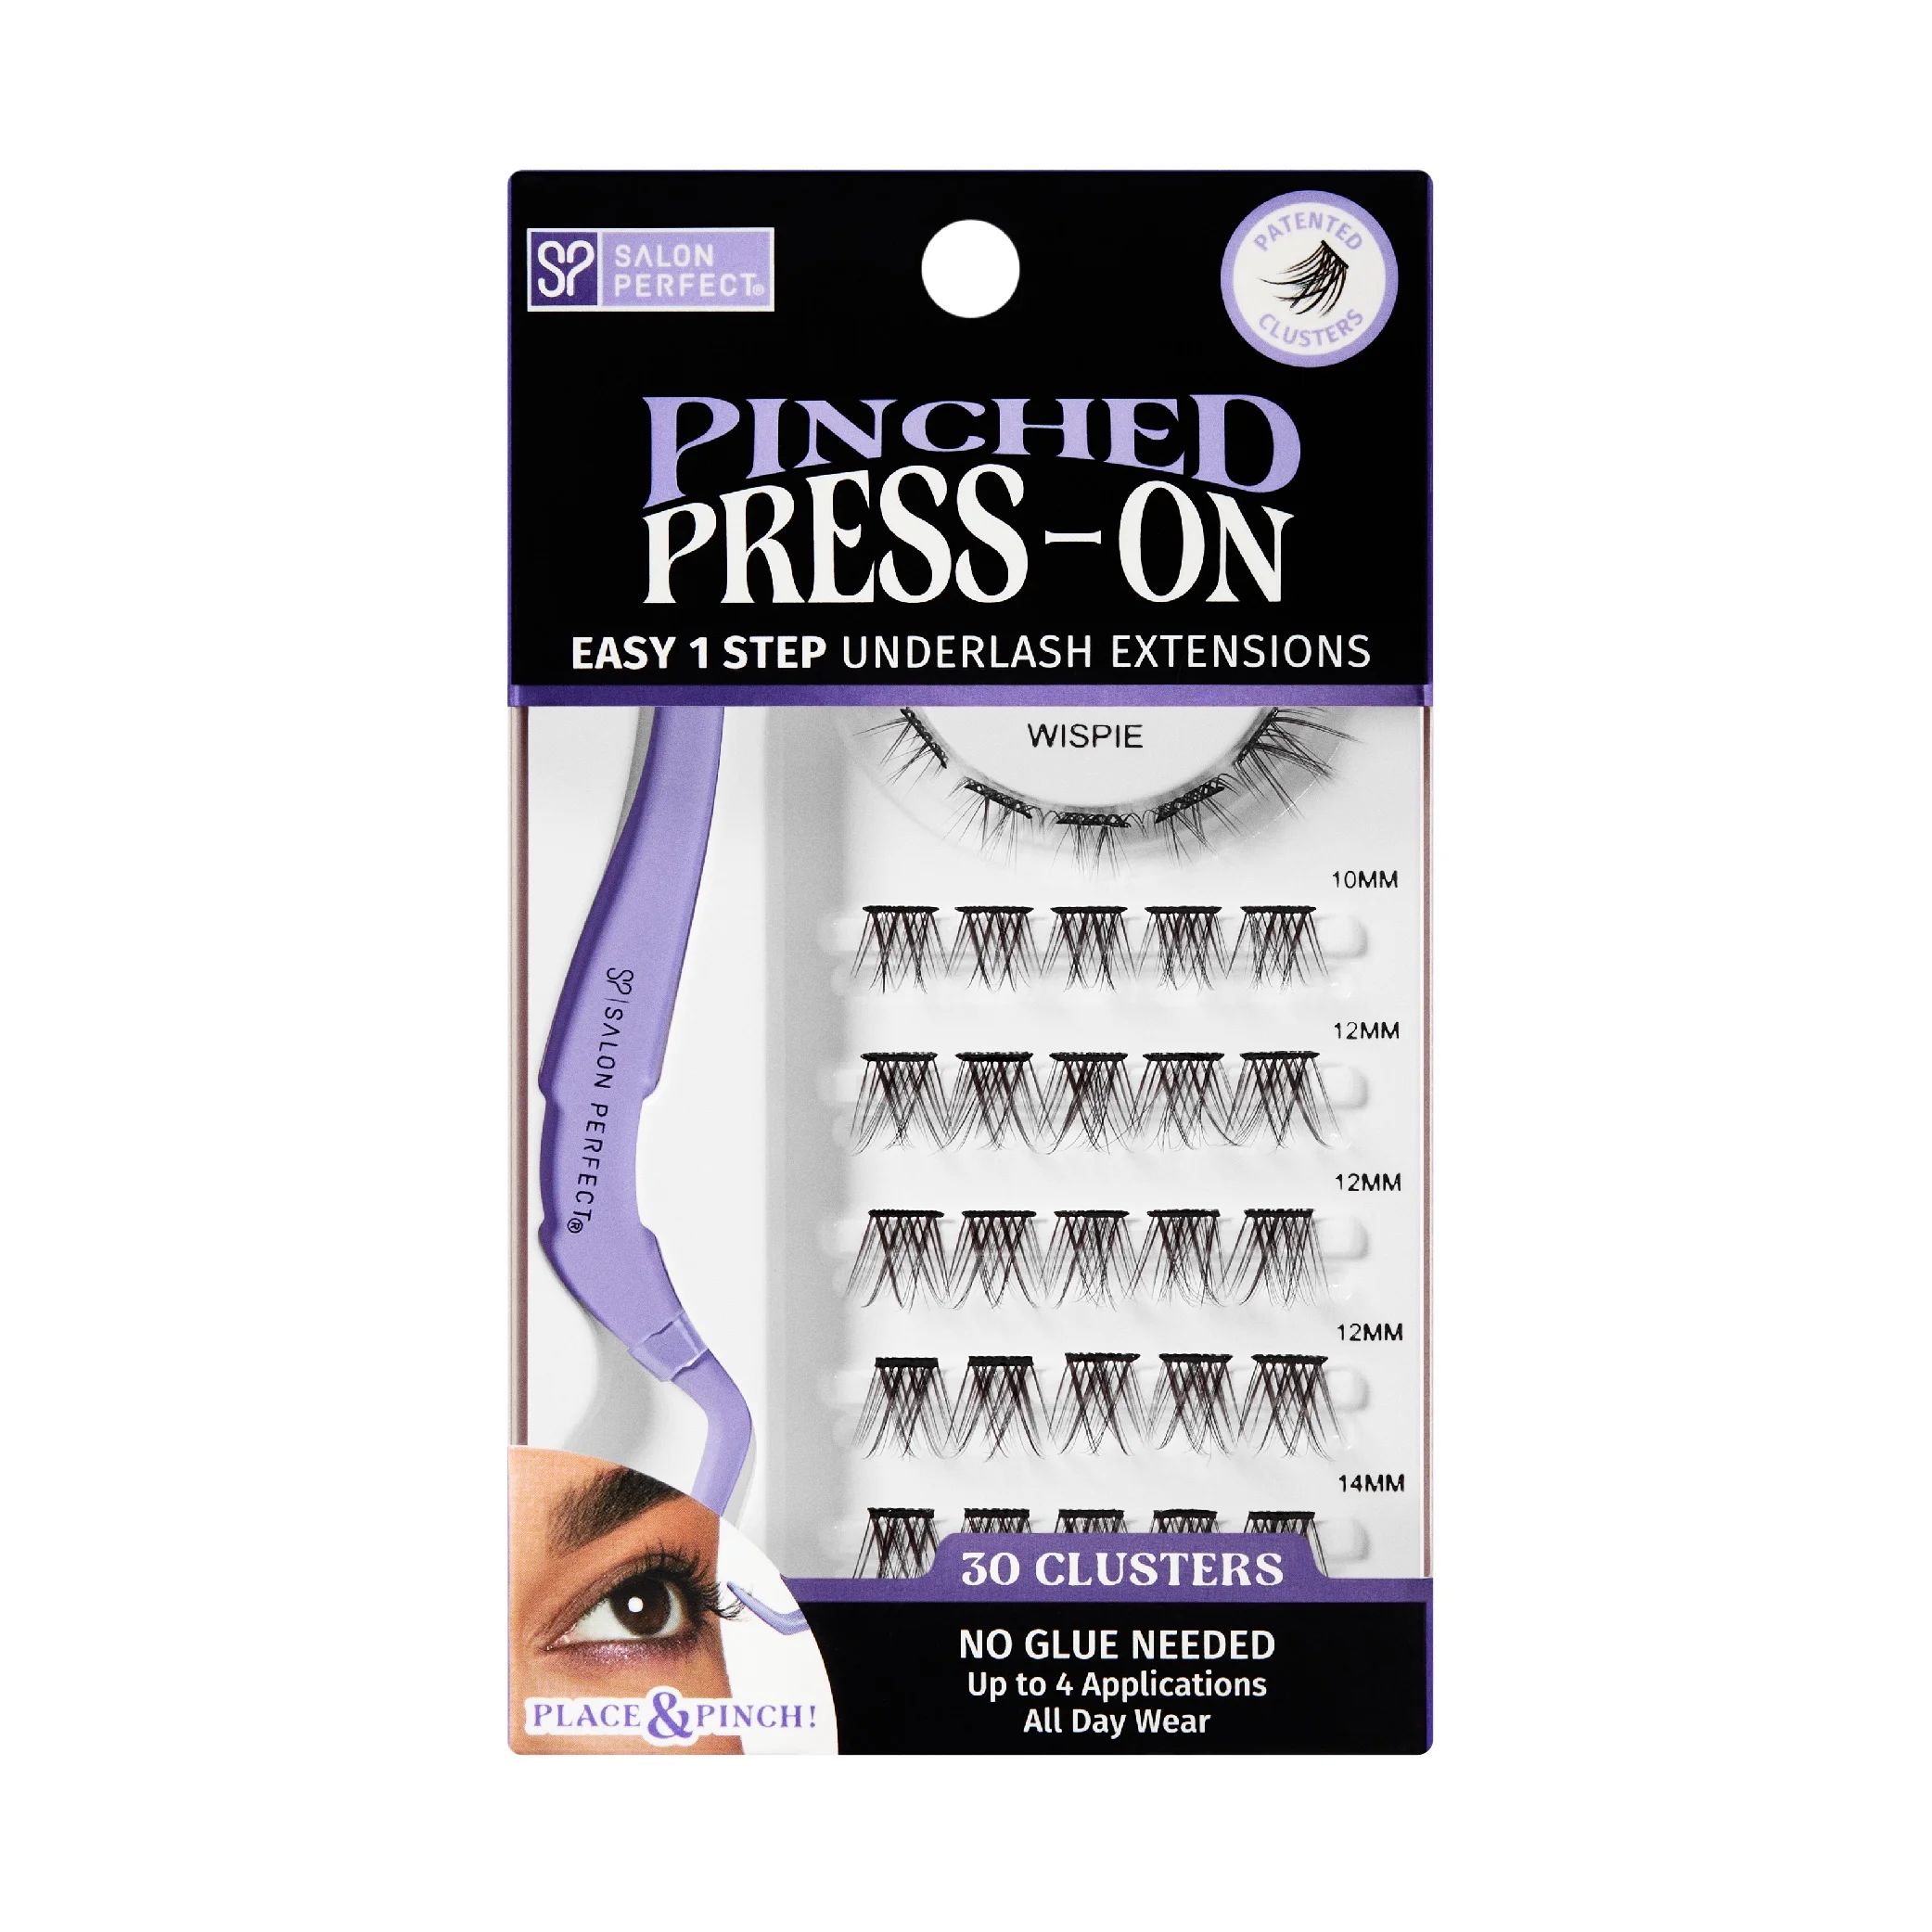 Salon Perfect Pinched Press-On Pre-Glued Underlash Extensions Starter Kit, 30 Clusters | Walmart (US)